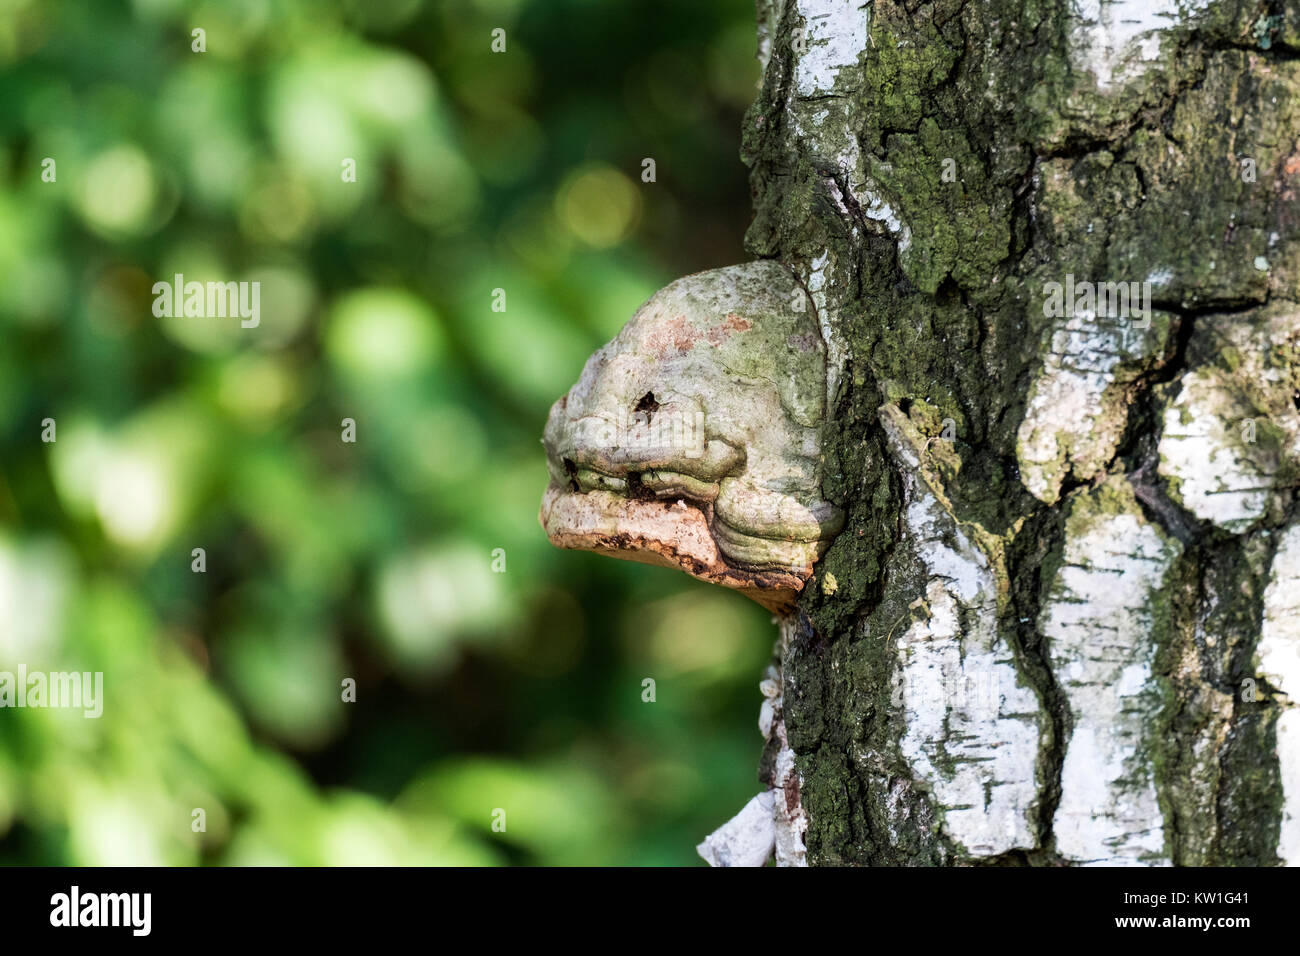 Tinder fungus, a parasite on the birch trunk, resembling the head of moray eels (Fomes fomentarius) Stock Photo